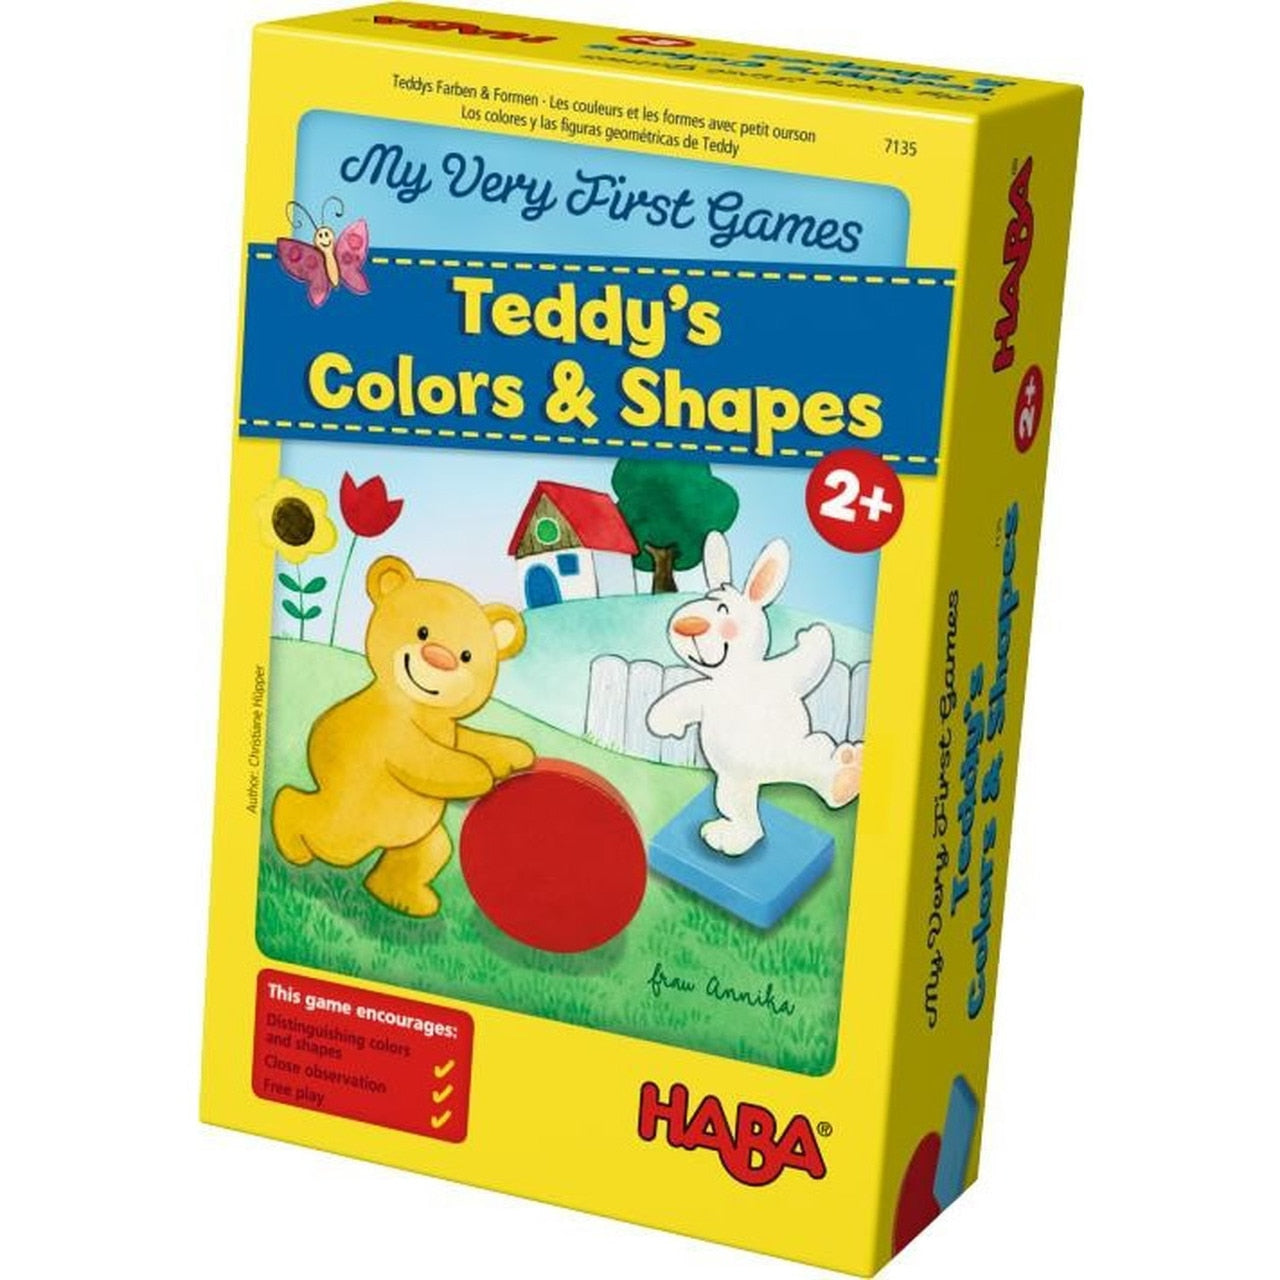 My Very First Games - Teddy's Colors and Shapes